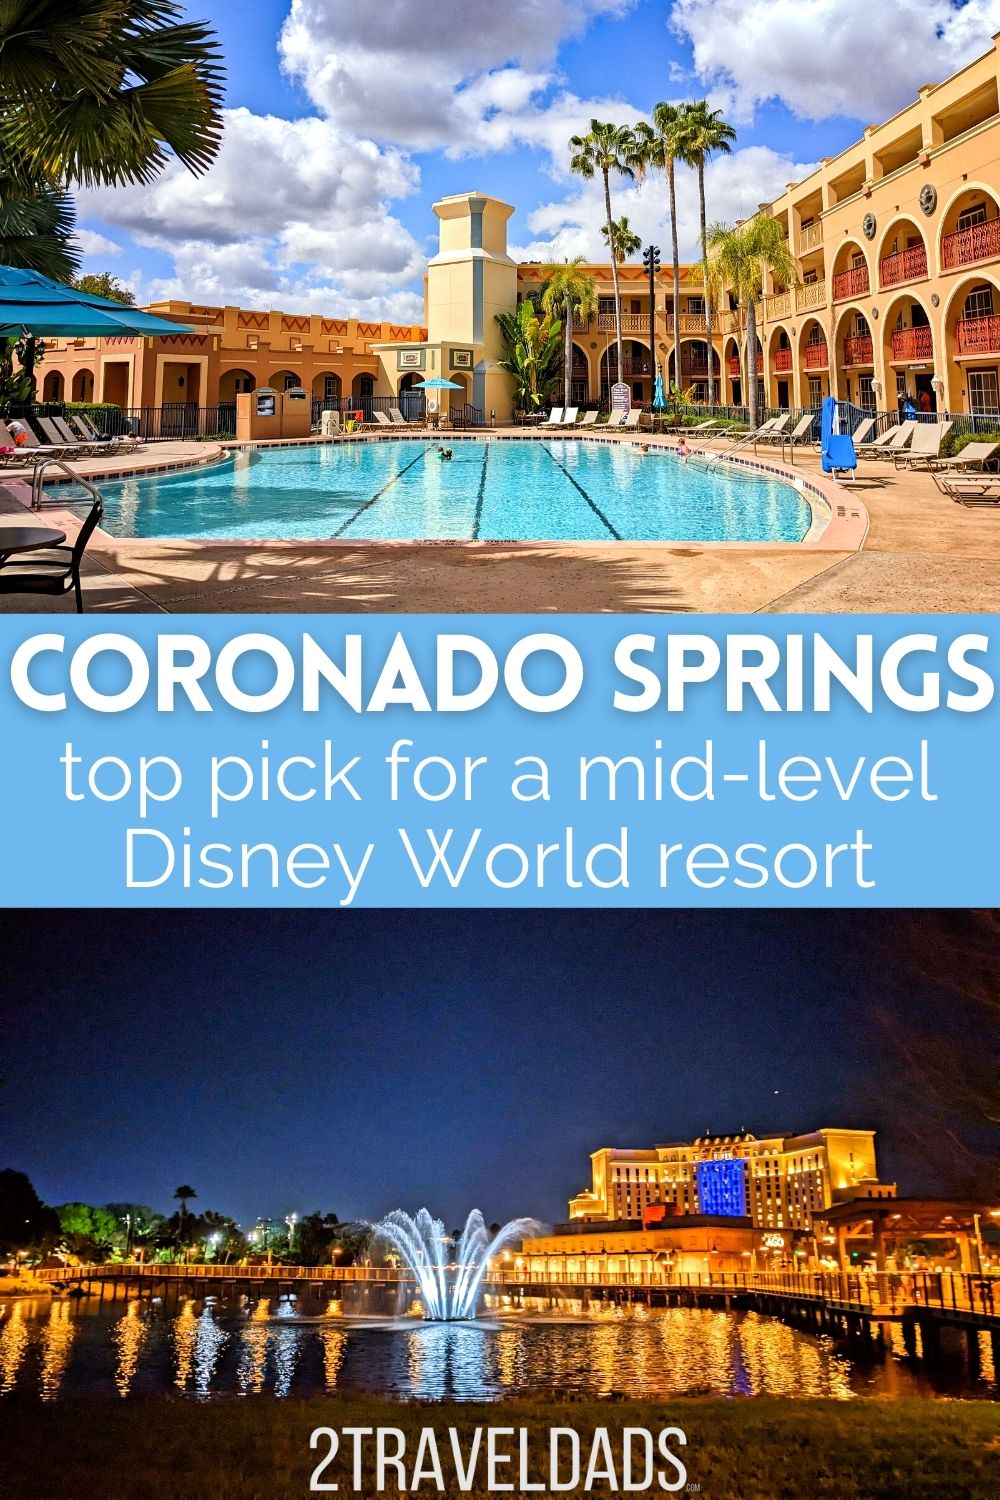 Disney's Coronado Springs Resort is a very different Walt Disney World Hotel. It feels unlike other Disney properties while still having the Disney touches and service. Review of Coronado Springs includes dining, transportation and more.